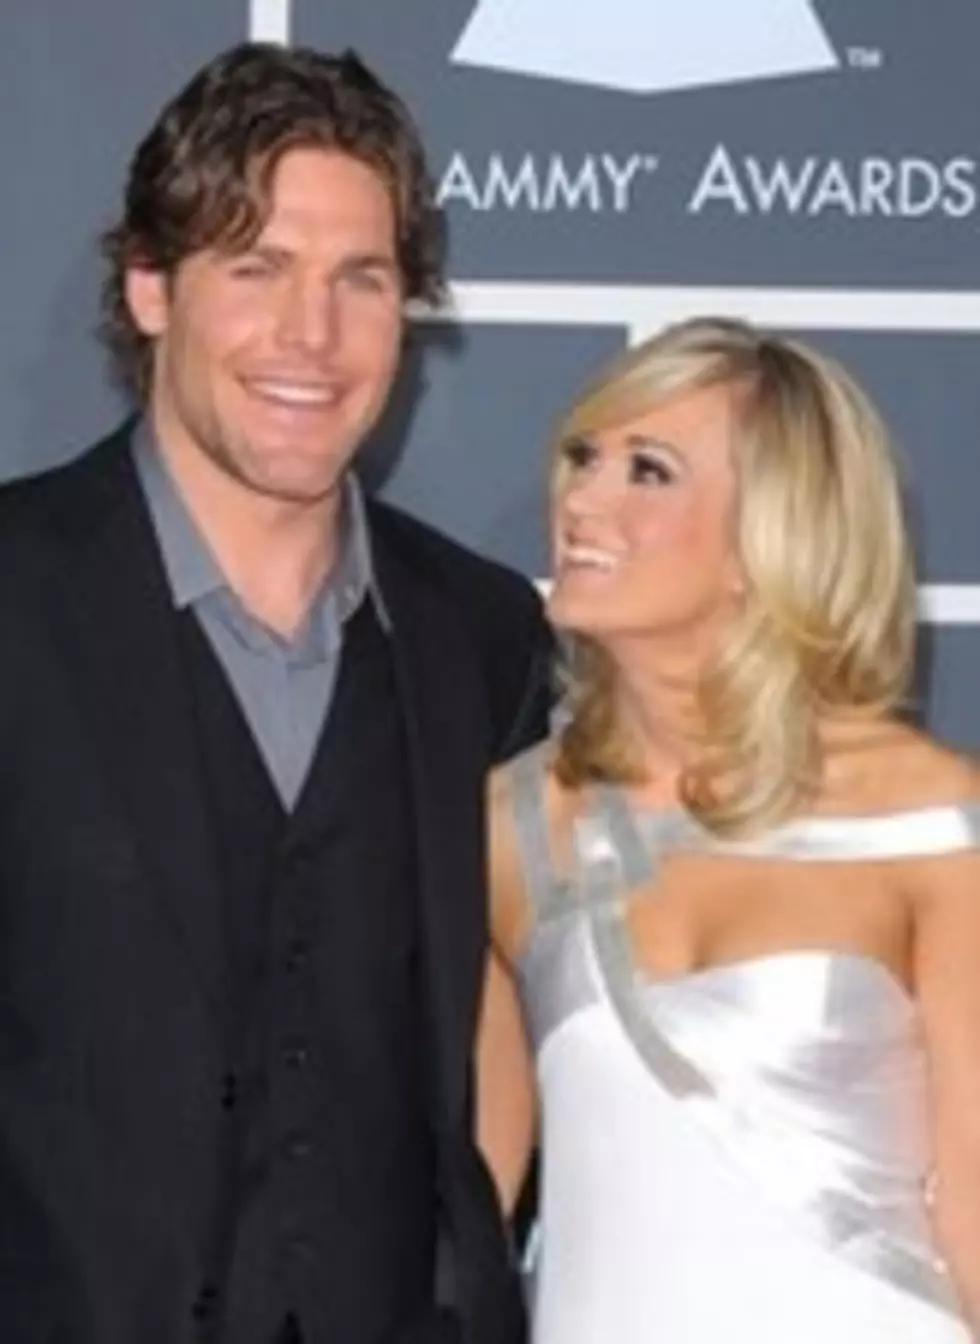 A Day in the Country &#8212; Wedding Day for Carrie Underwood [Video]